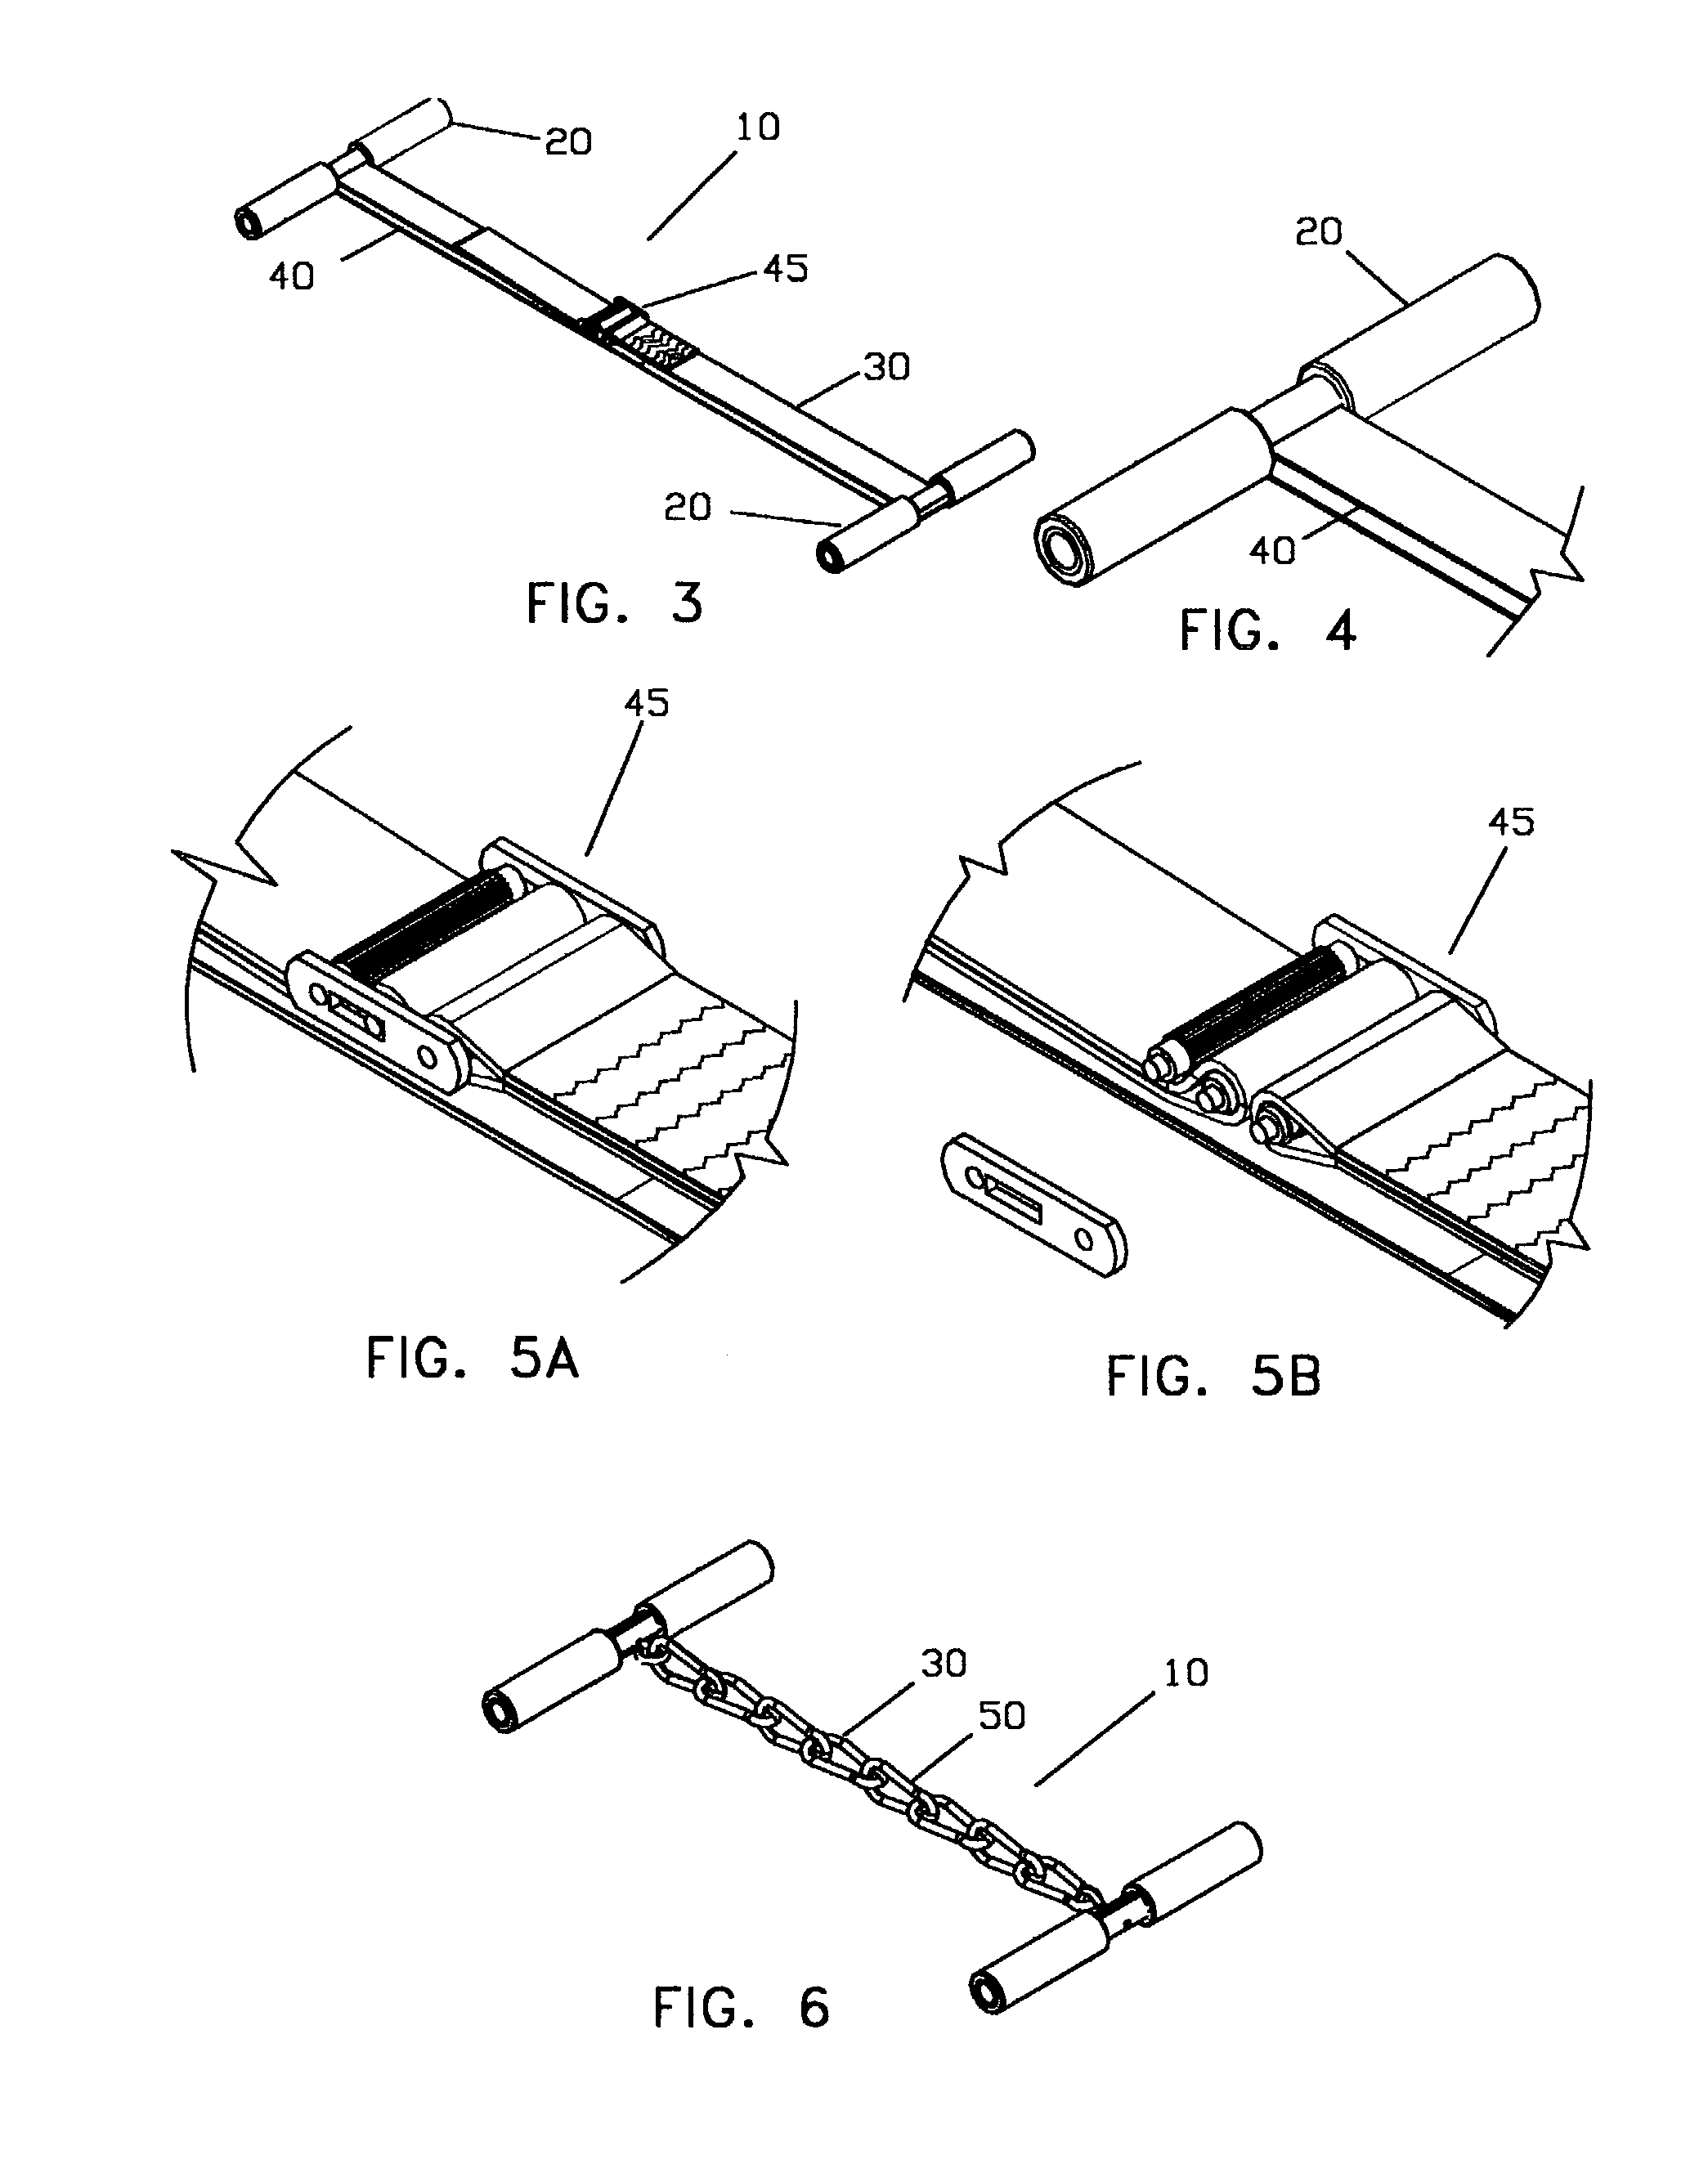 Portable exercise apparatus for sit-up exercise